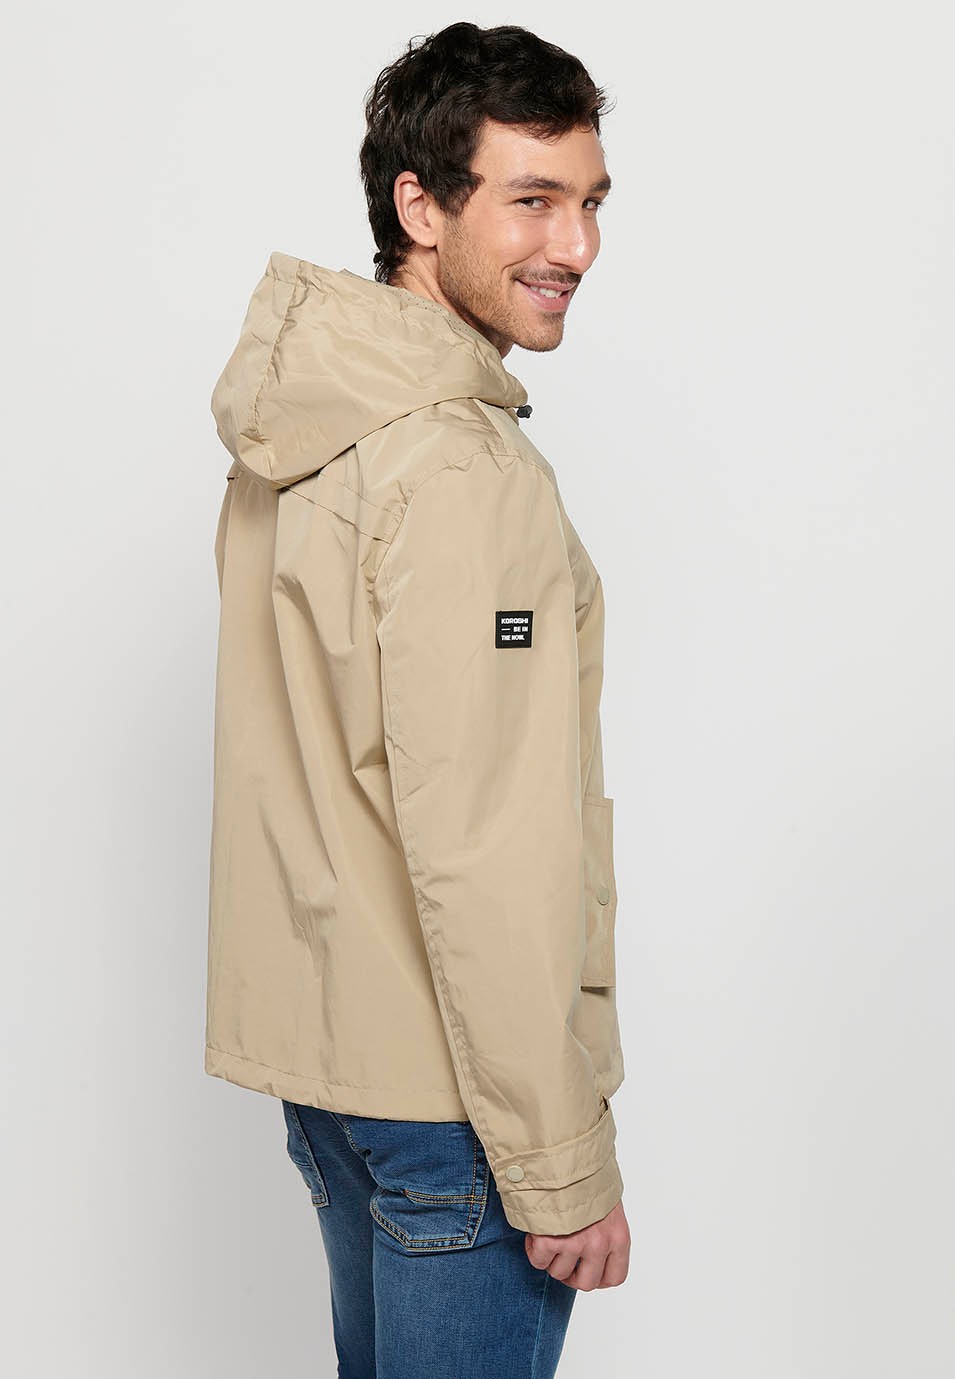 Water Repellent Jacket with Hooded Collar and Front Zipper Closure, Beige Pockets for Men 6